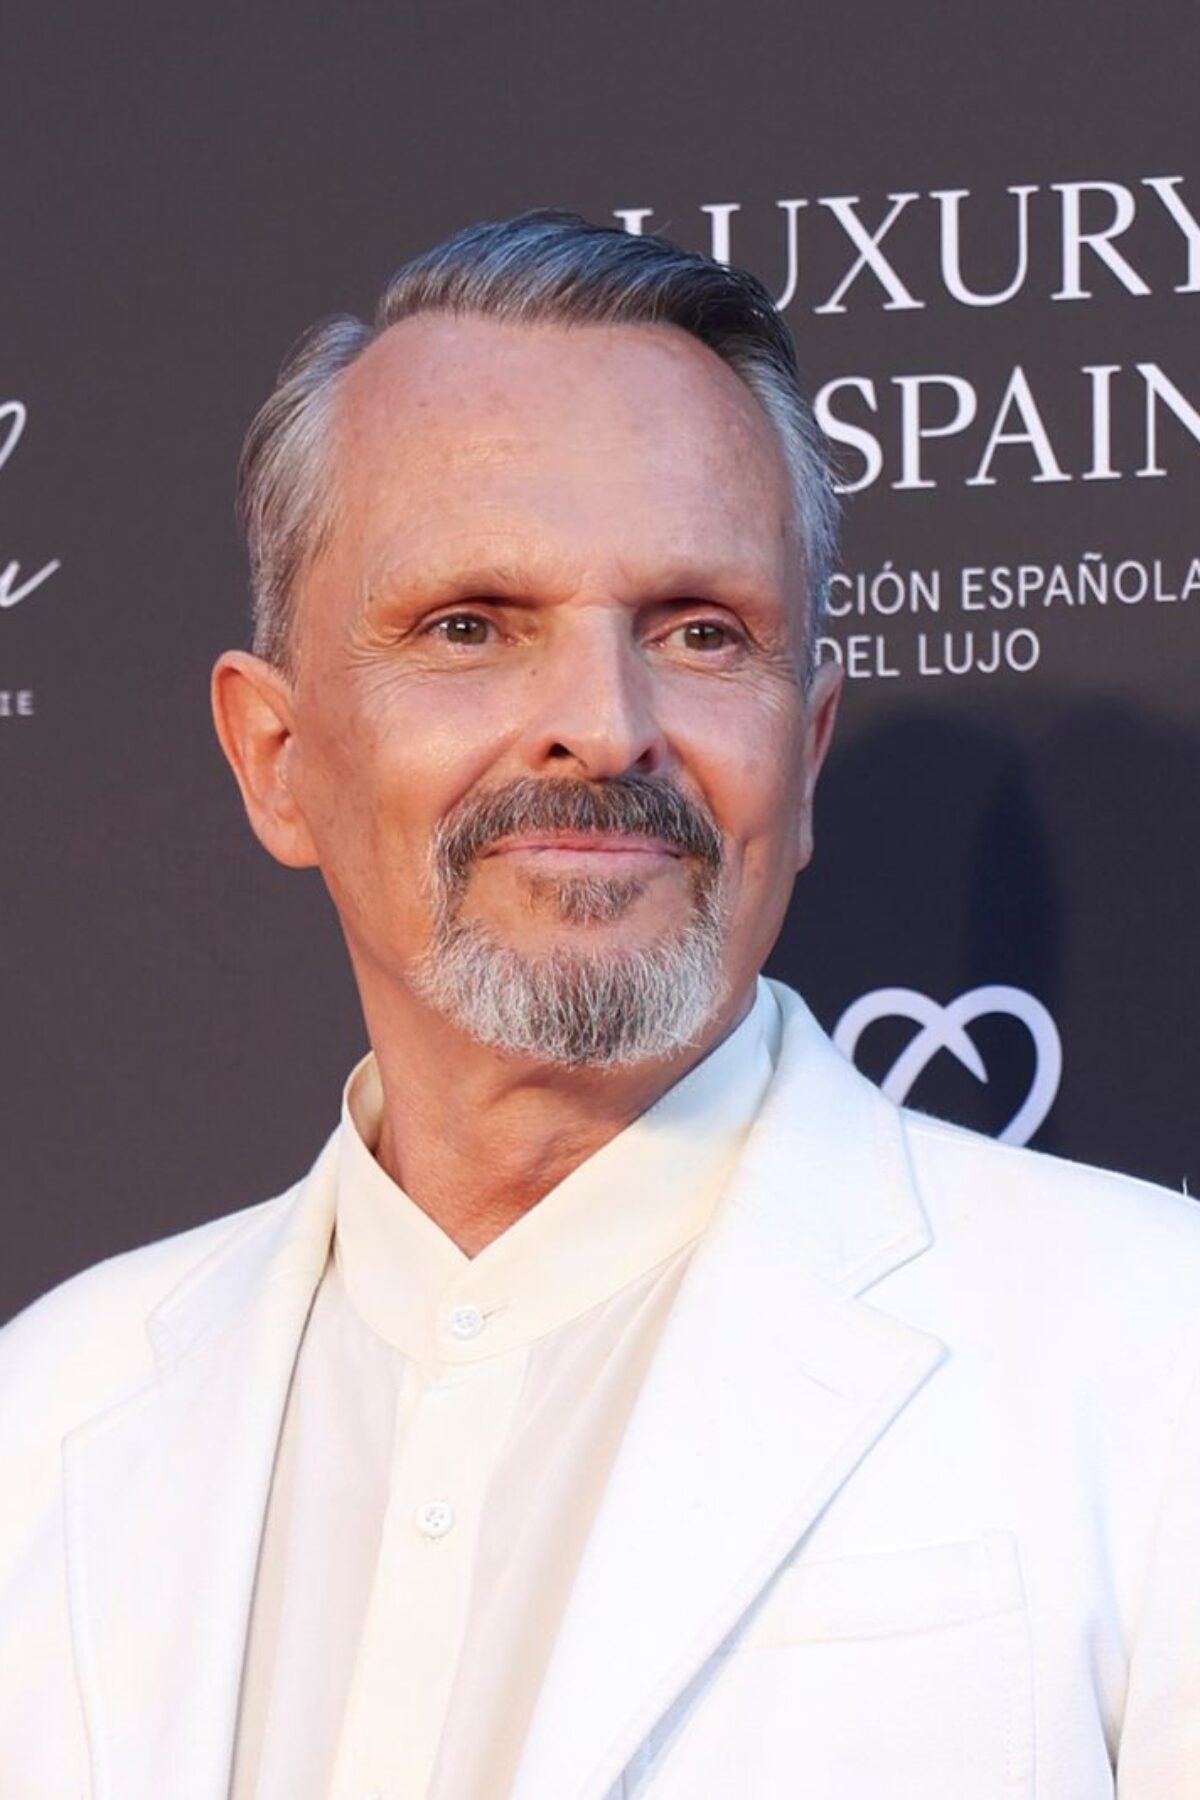 MARBELLA, SPAIN - JULY 24: Miguel Bose attends the Global Gift Gala Red Carpet at Hotel Don Pepe on July 24, 2023 in Marbella, Spain. (Photo by Daniel Perez/Getty Images)